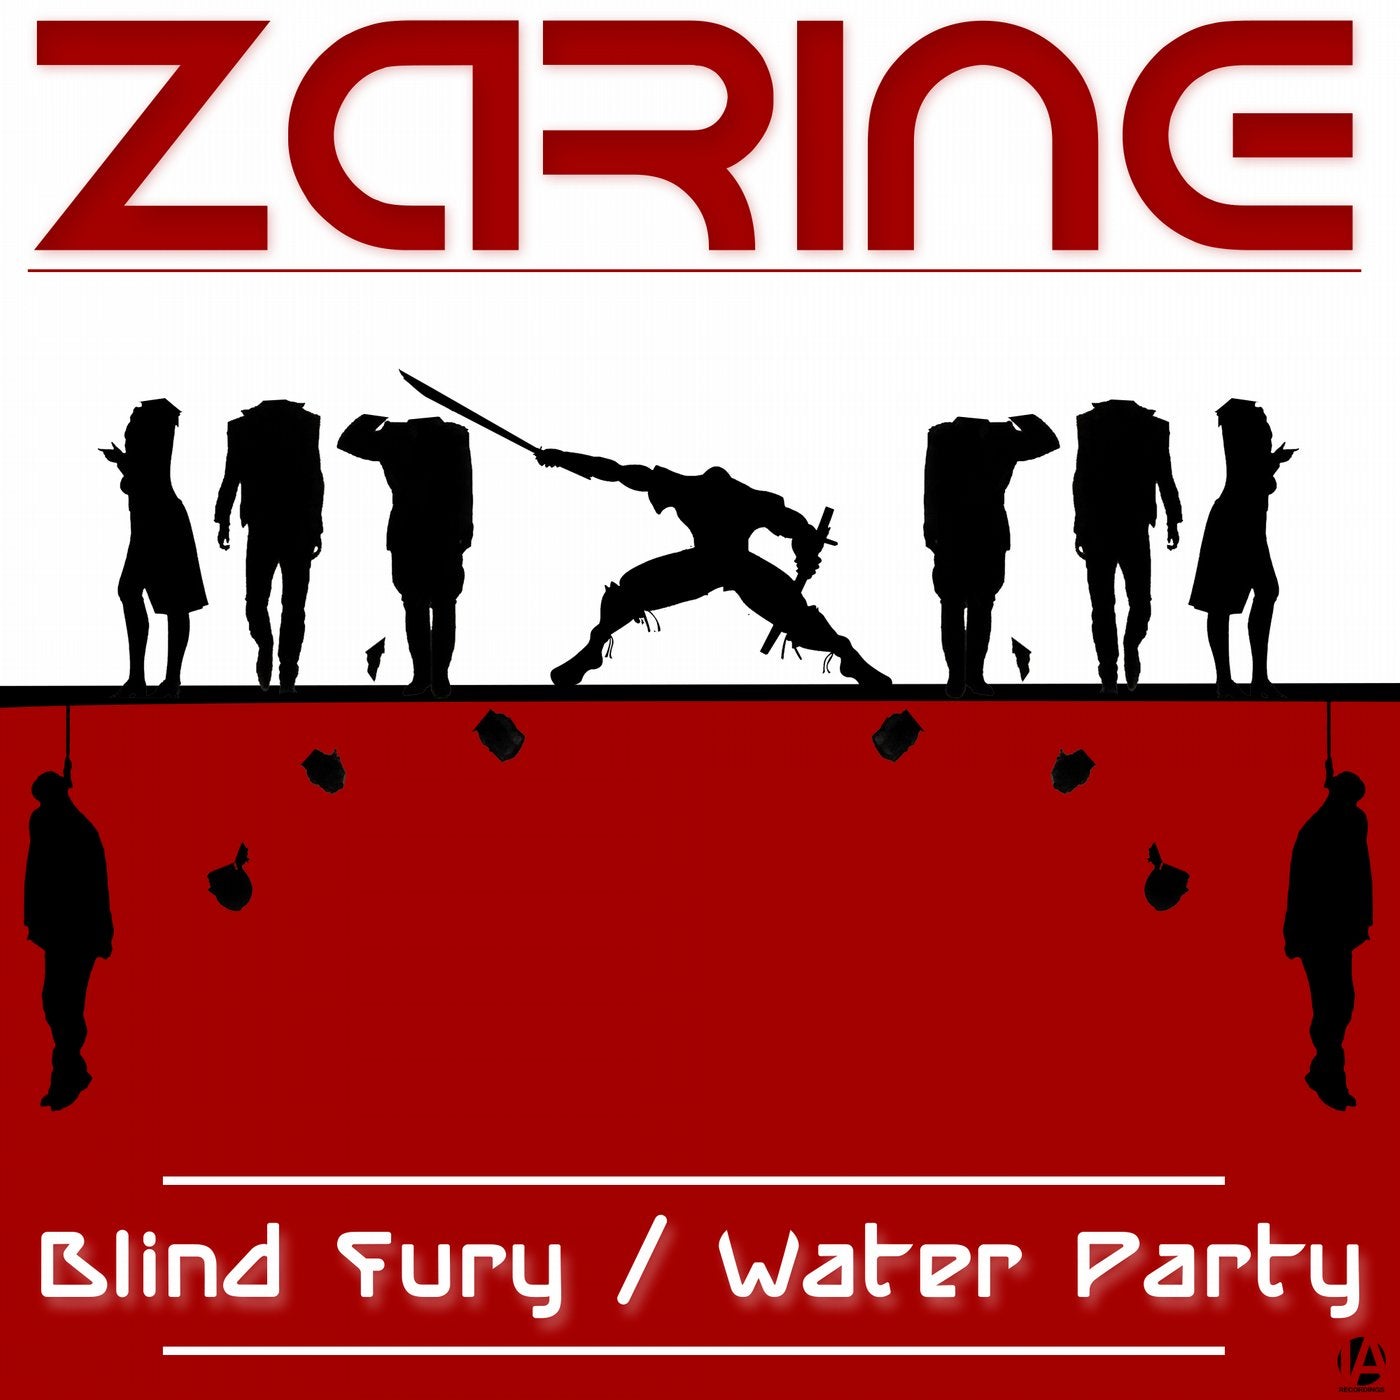 Blind Fury/Water Party